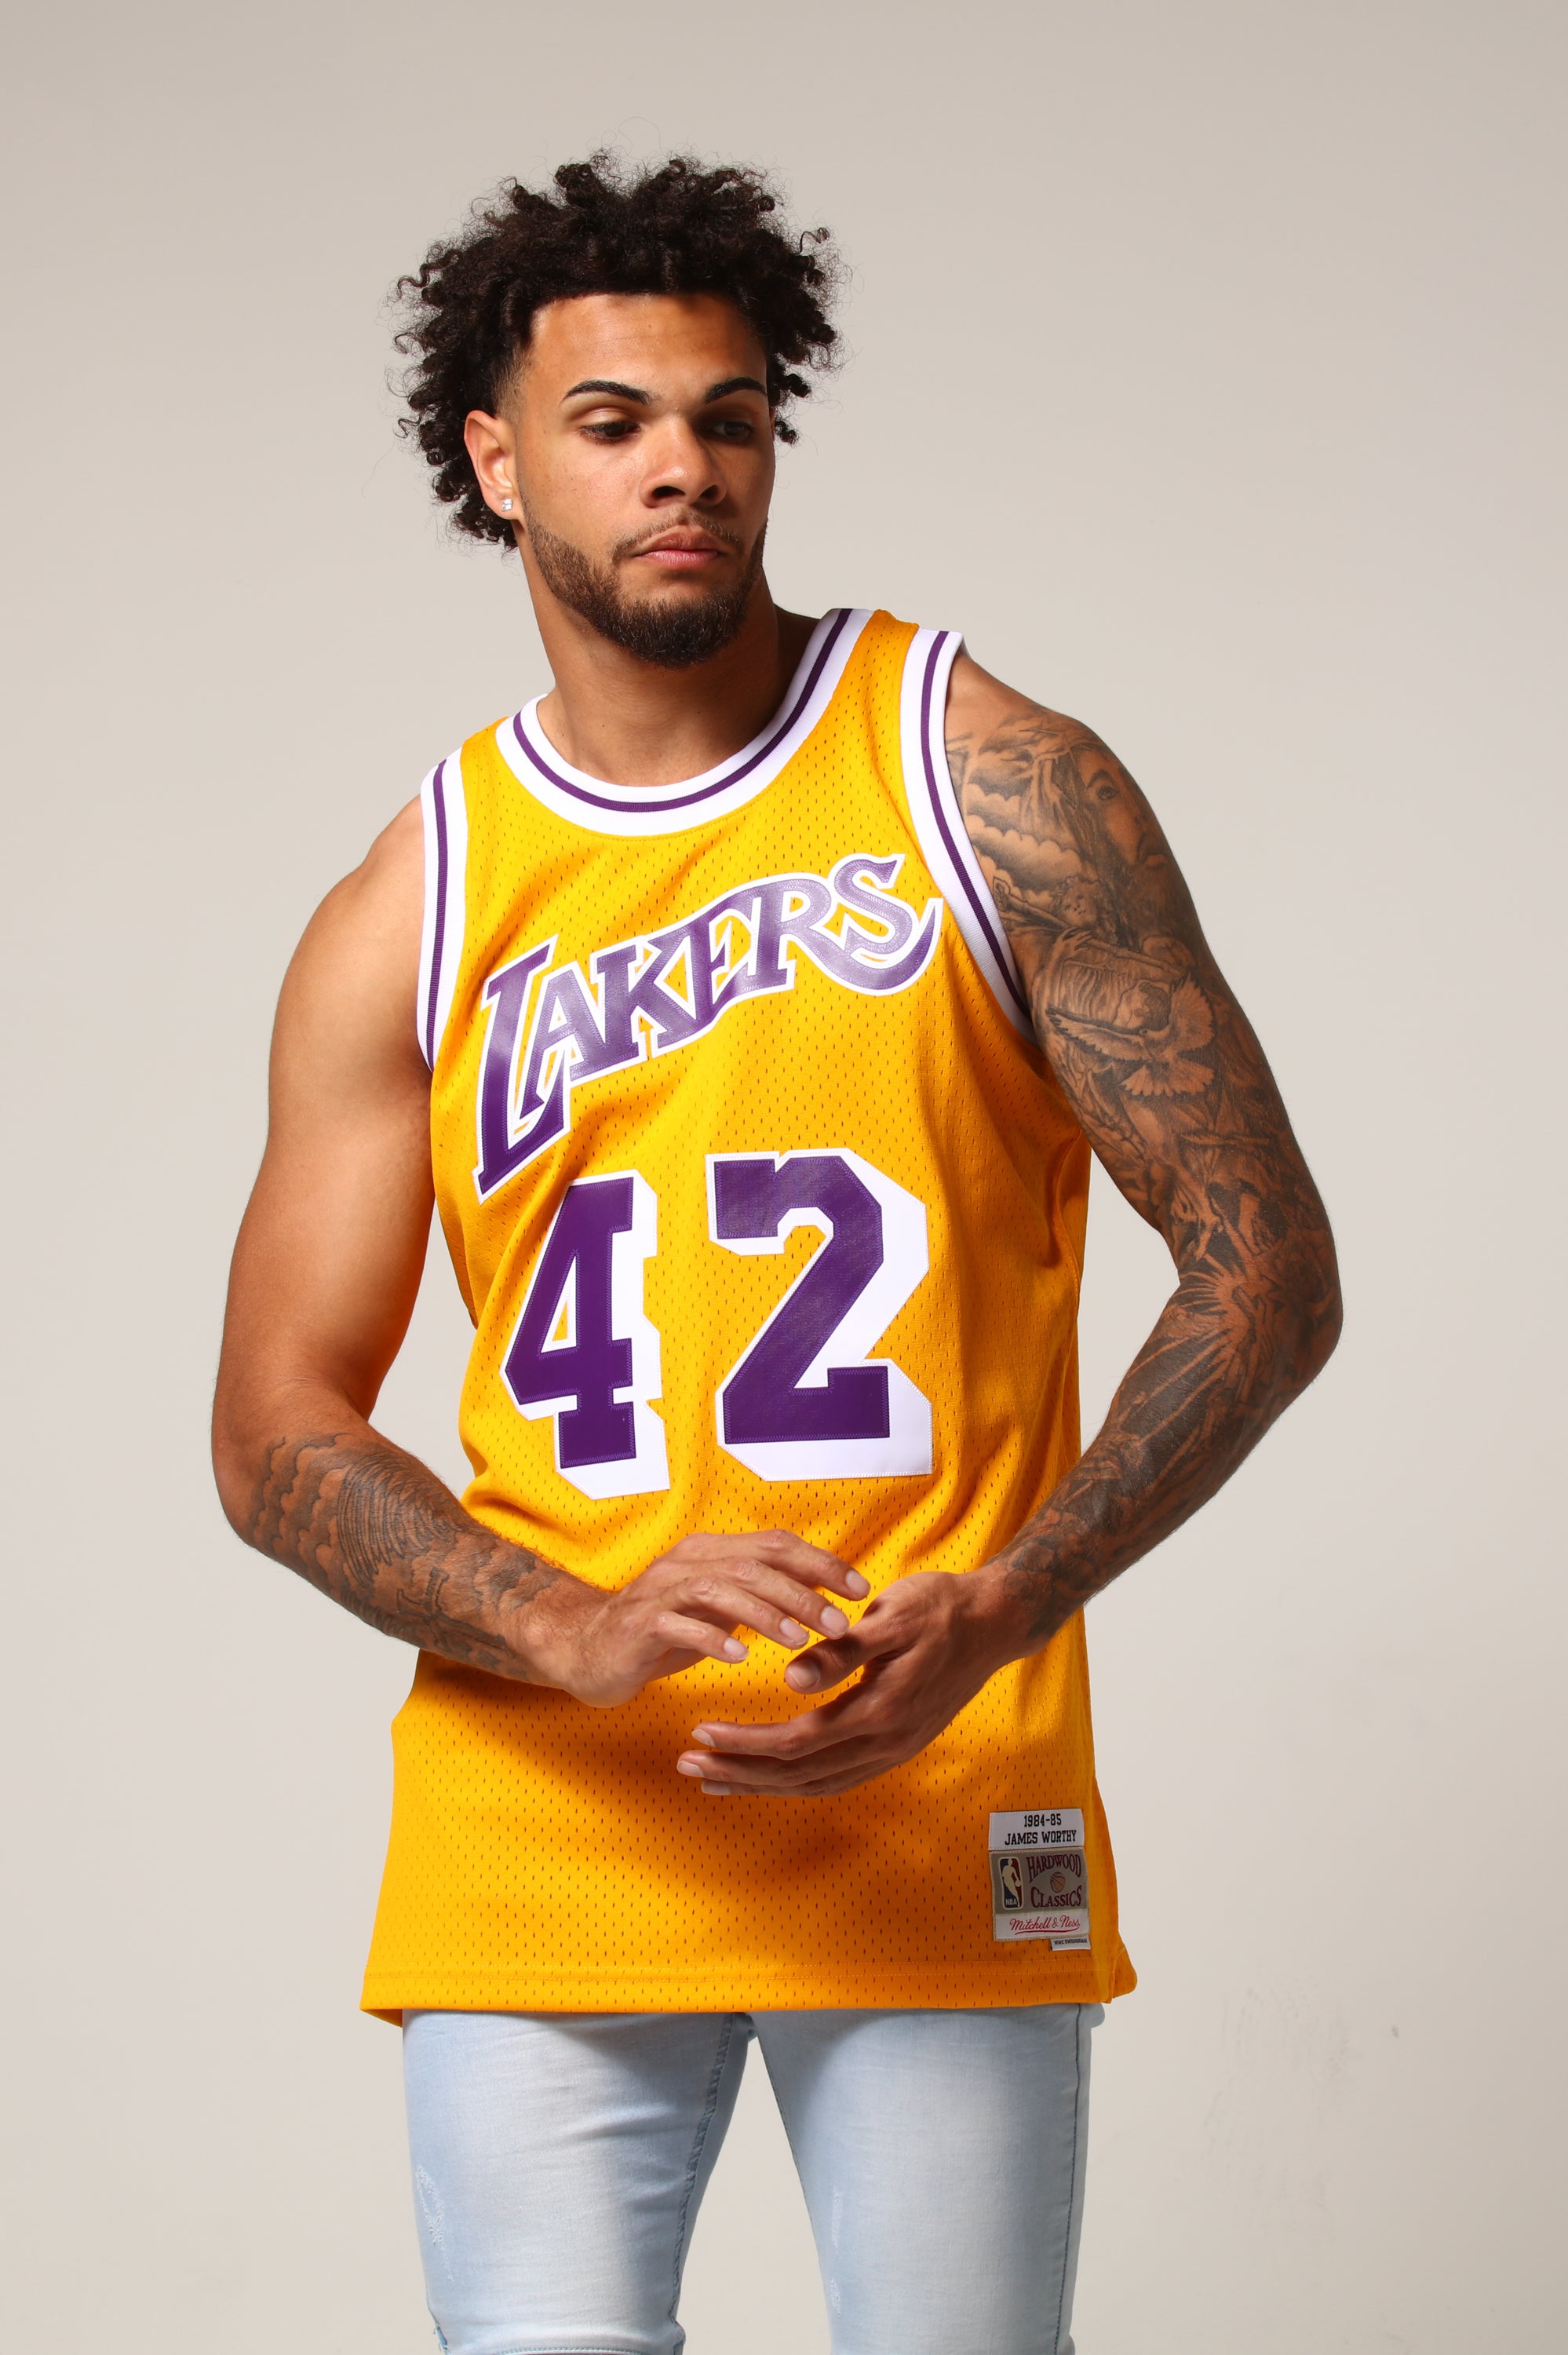 lakers 42 jersey